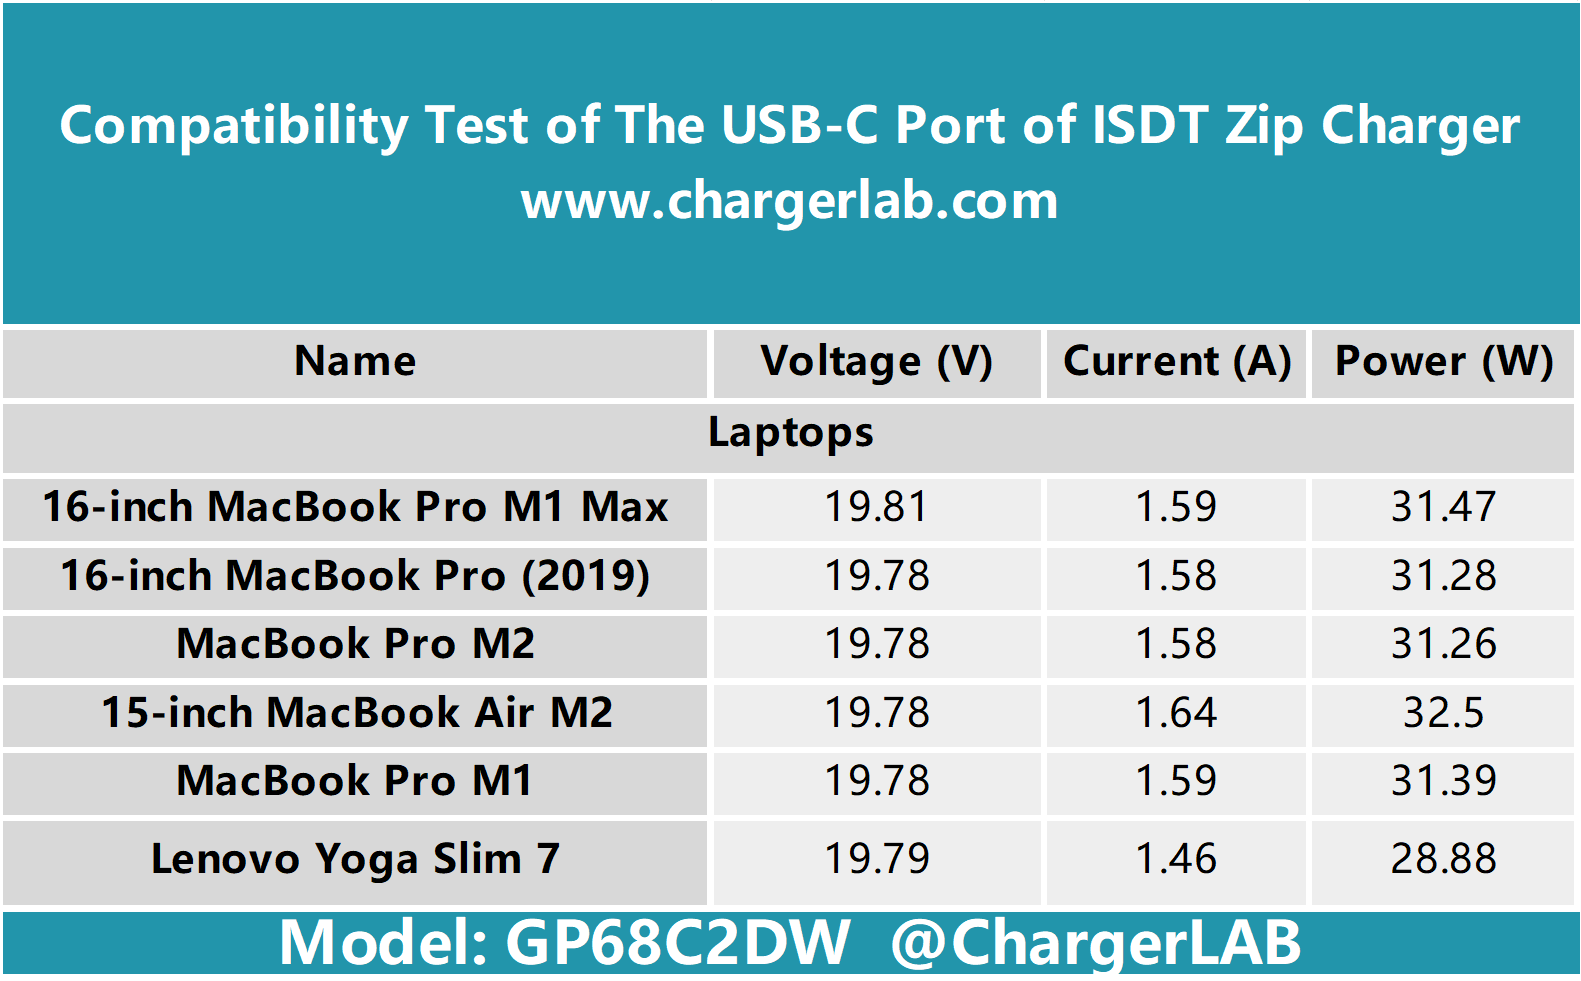 ISDT Zip 3-in-1 MagSafe Charger USB-C Charging Test - ChargerLAB Compatibility 100-Chargerlab